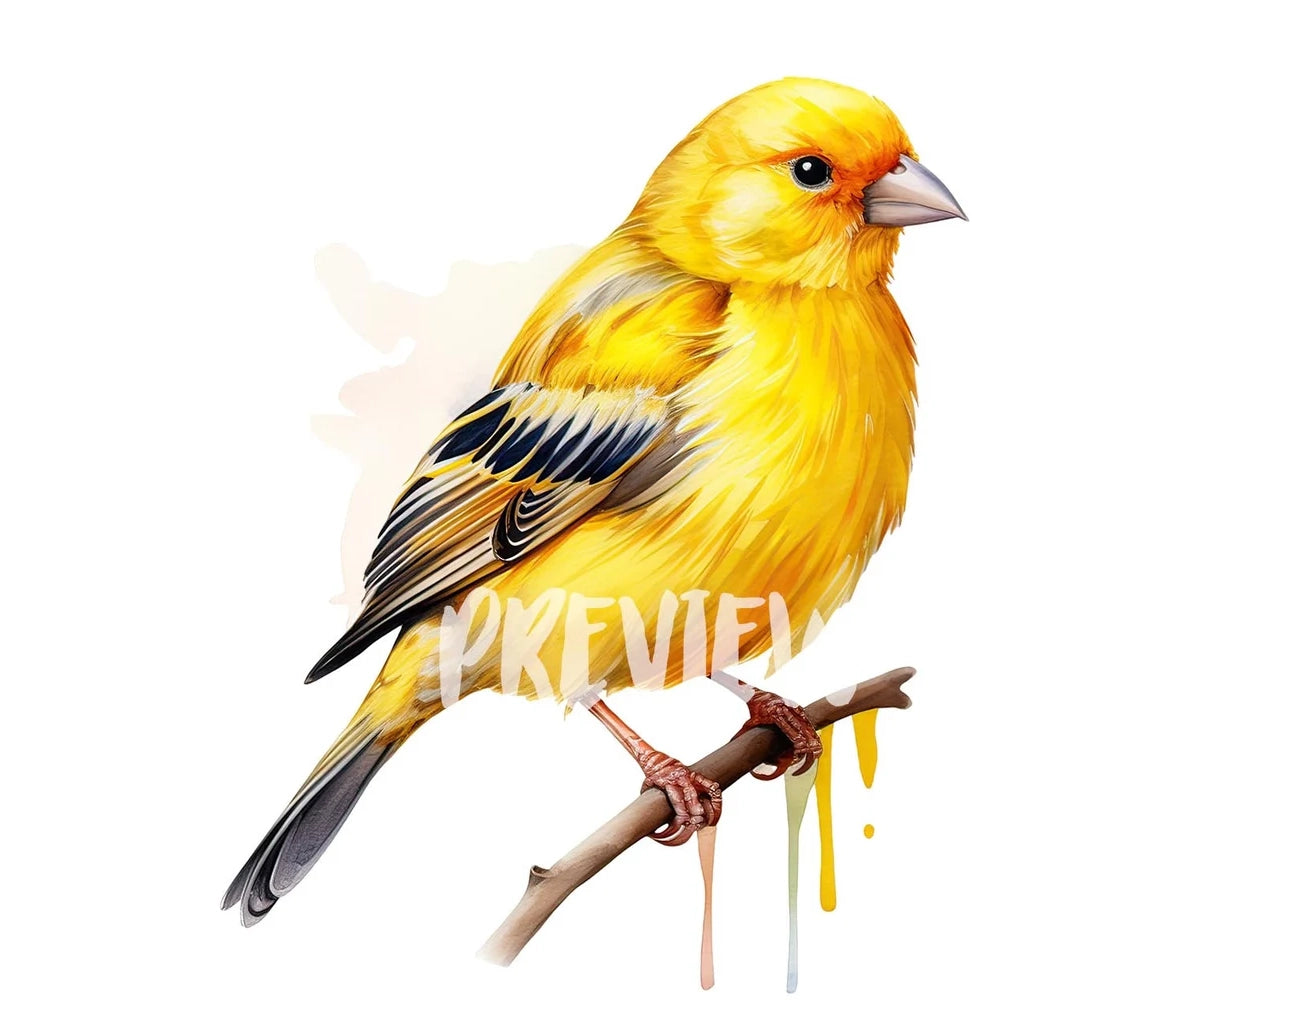 Watercolor Canary Clipart